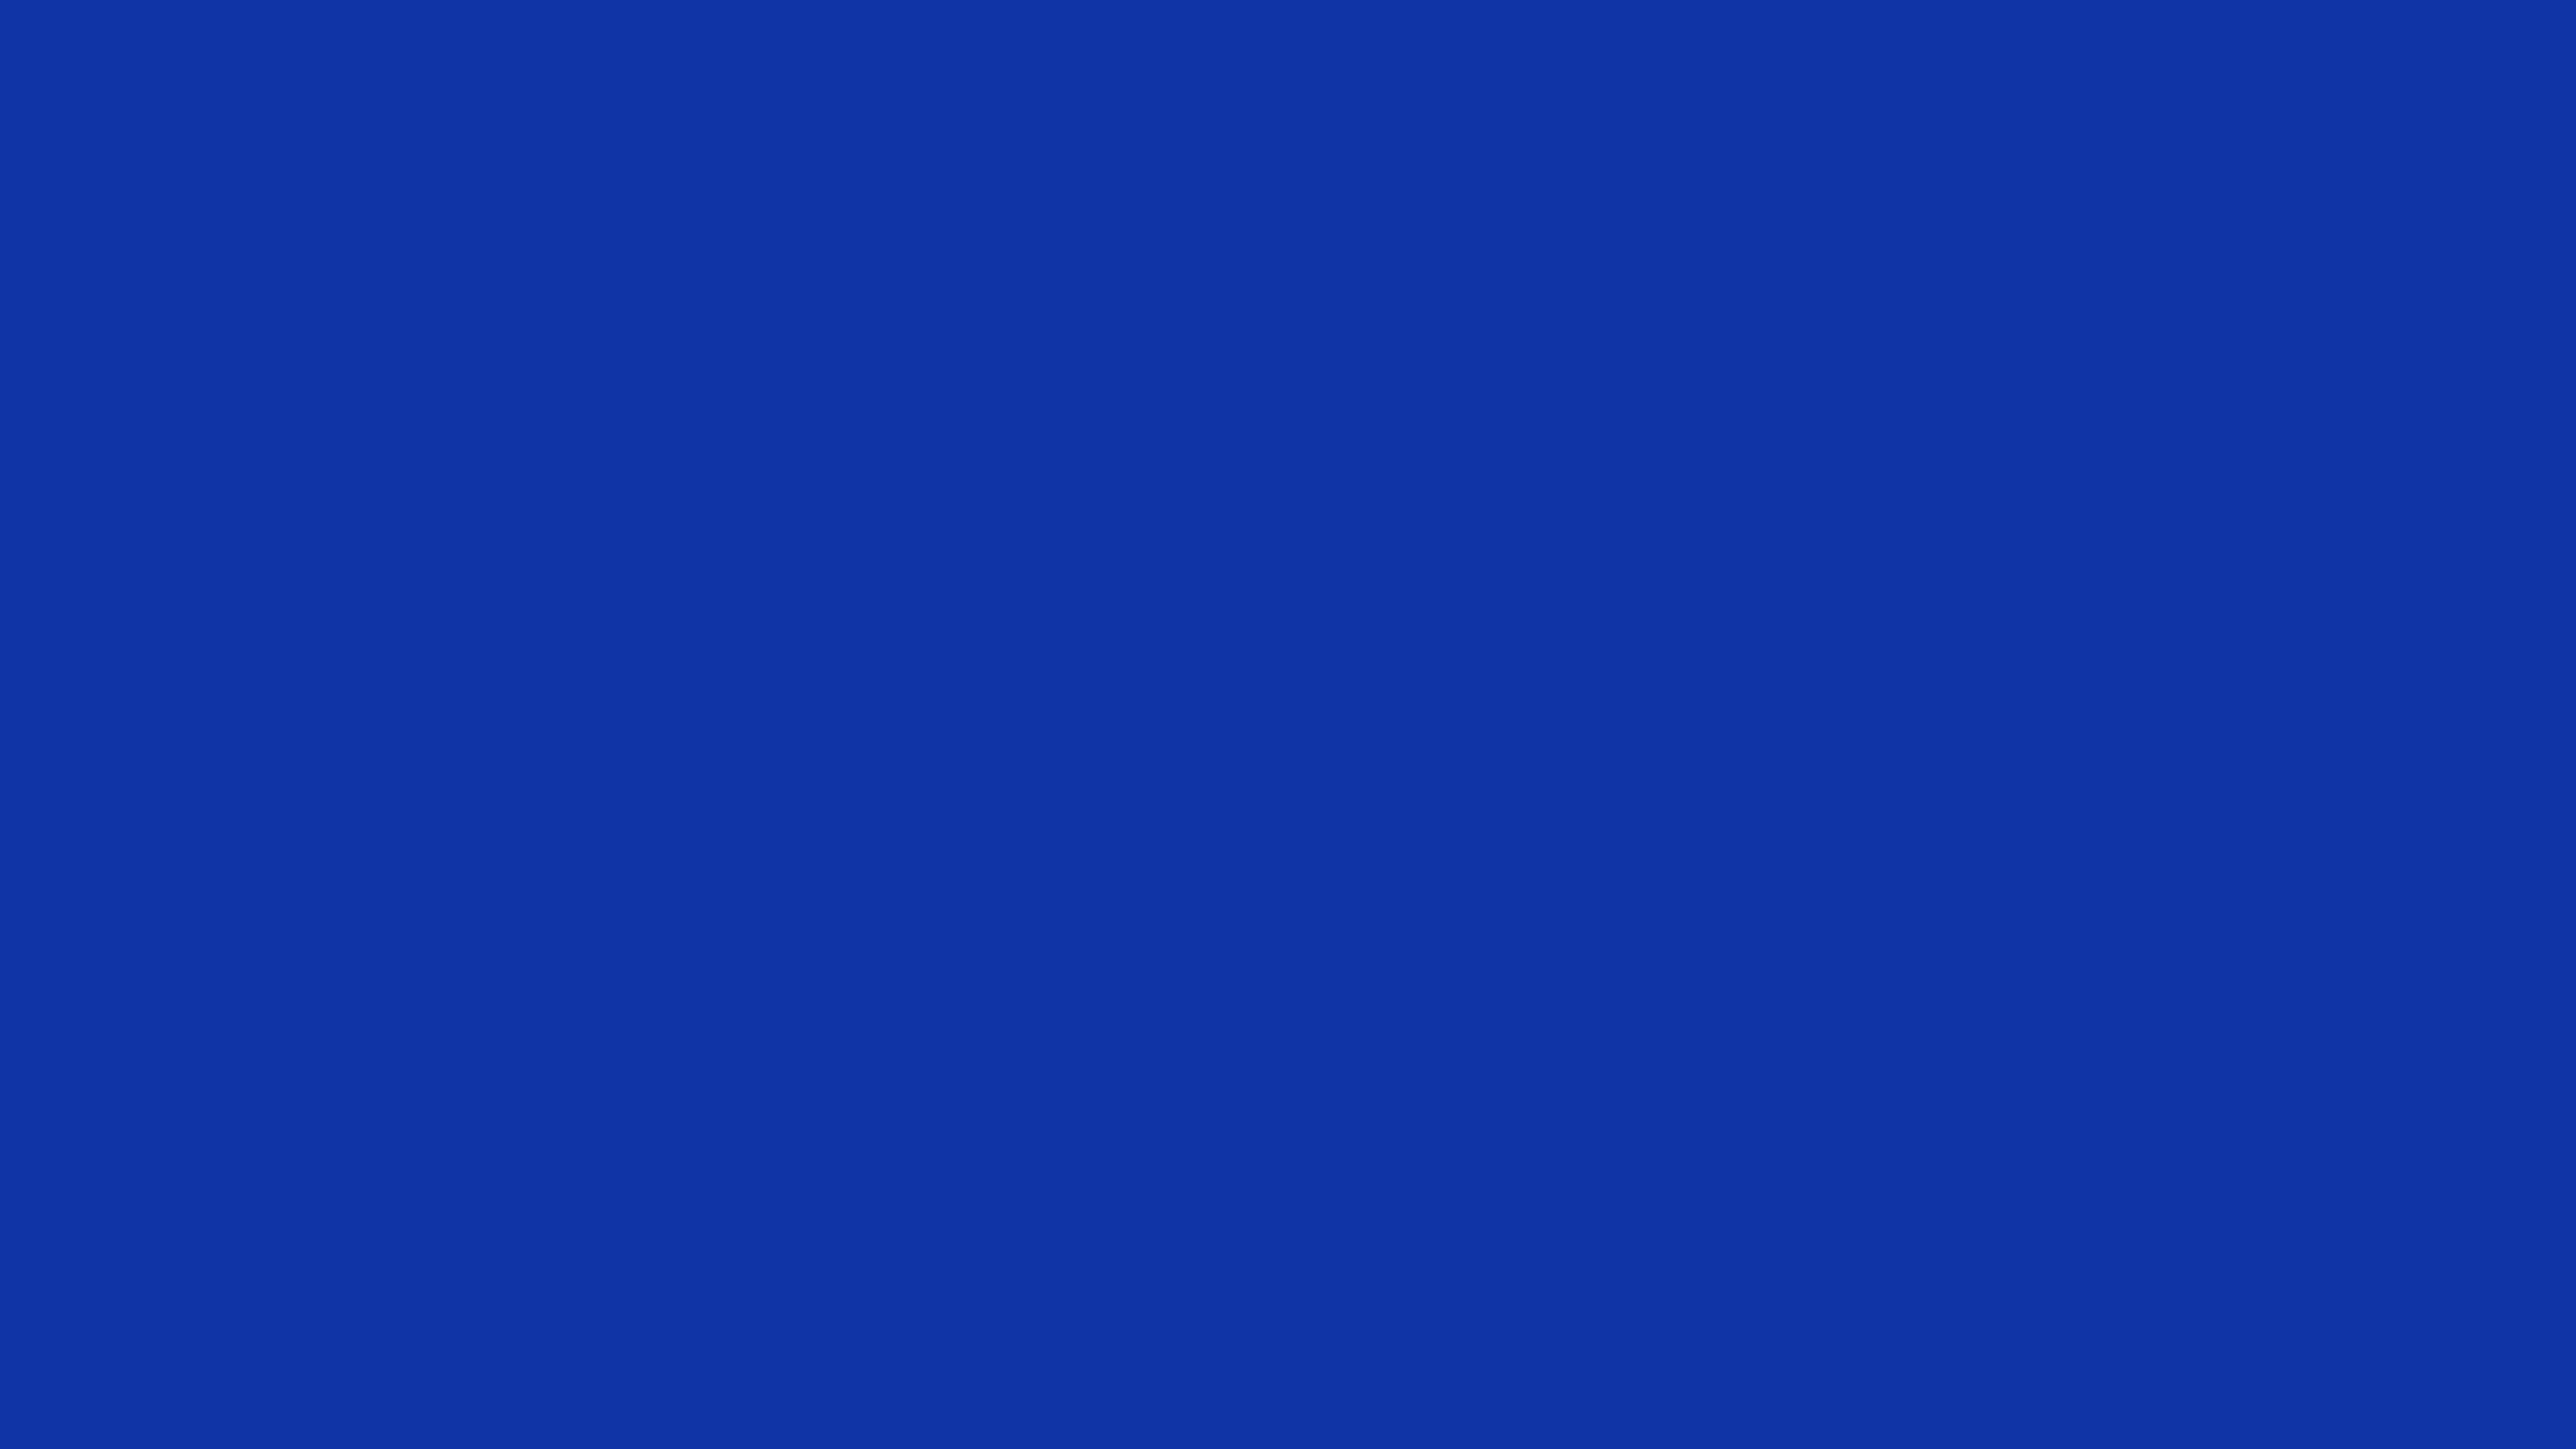 3840x2160 Egyptian Blue Solid Color Background